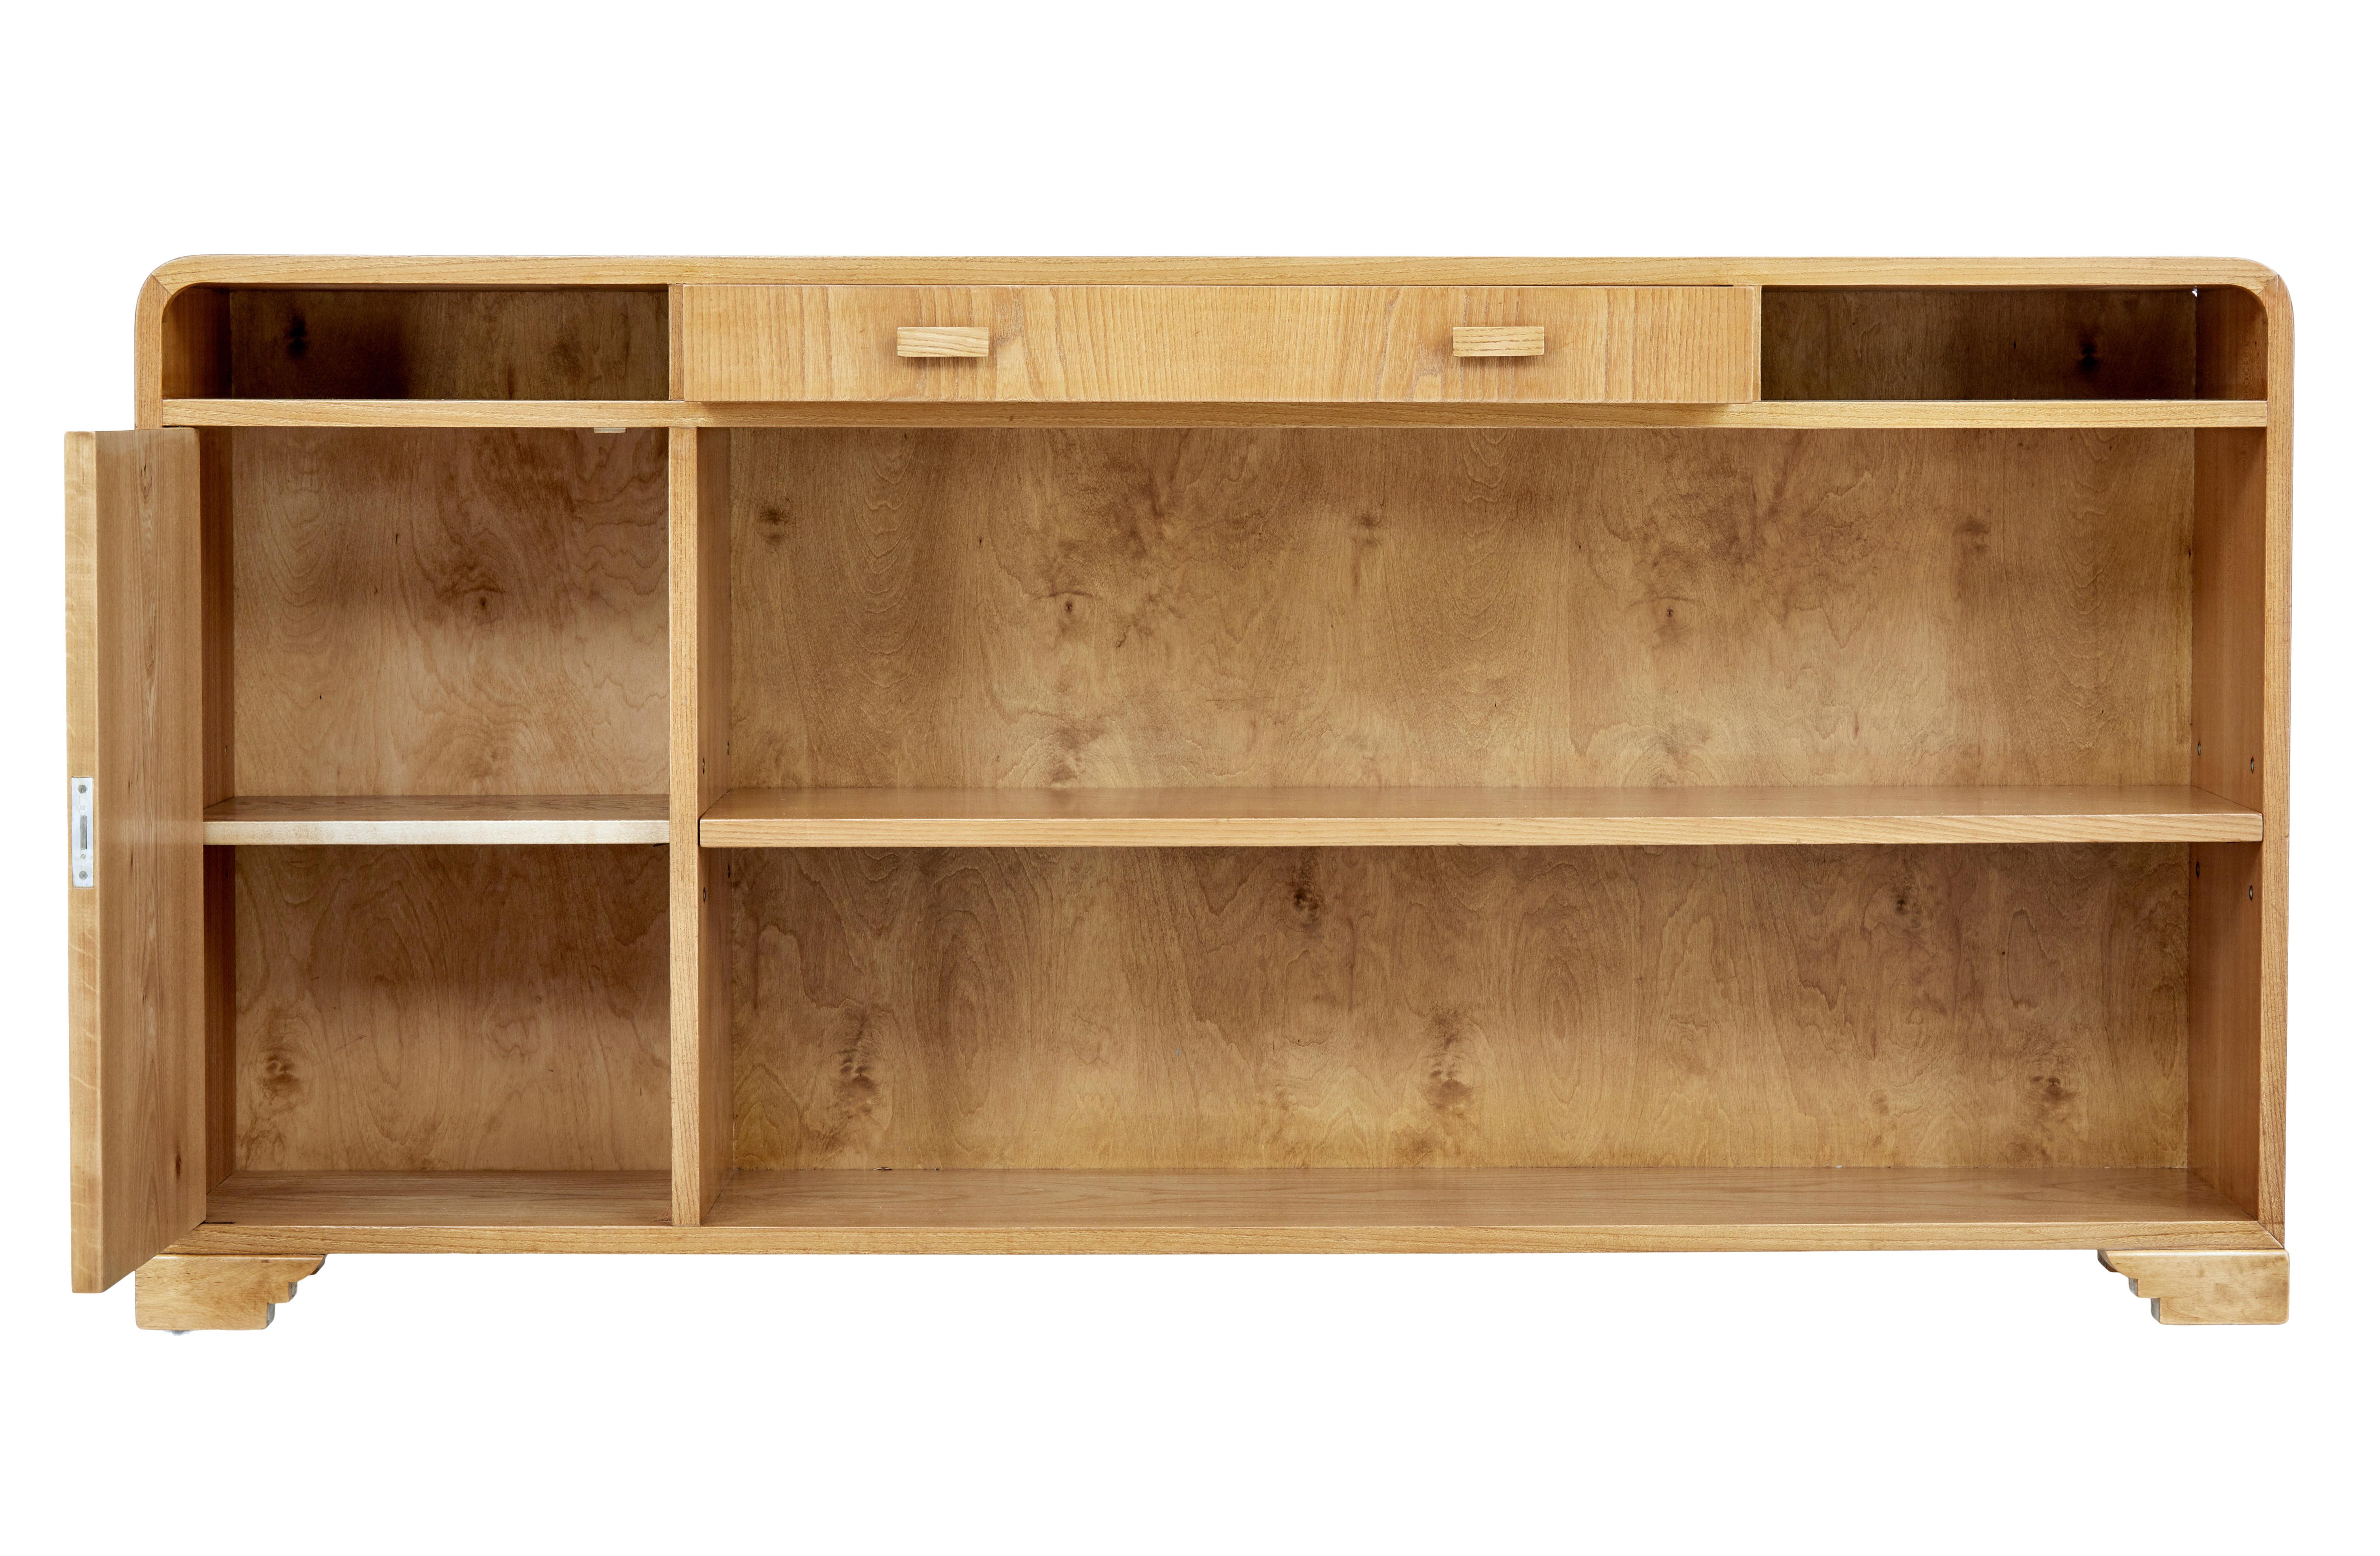 Scandinavian mid-20th century elm low open bookcase, circa 1950.

Superb storage solution for small spaces. Beautifully veneered in elm, with rounded corners to provide that deco inspired look. Central drawer below the top surface with an open